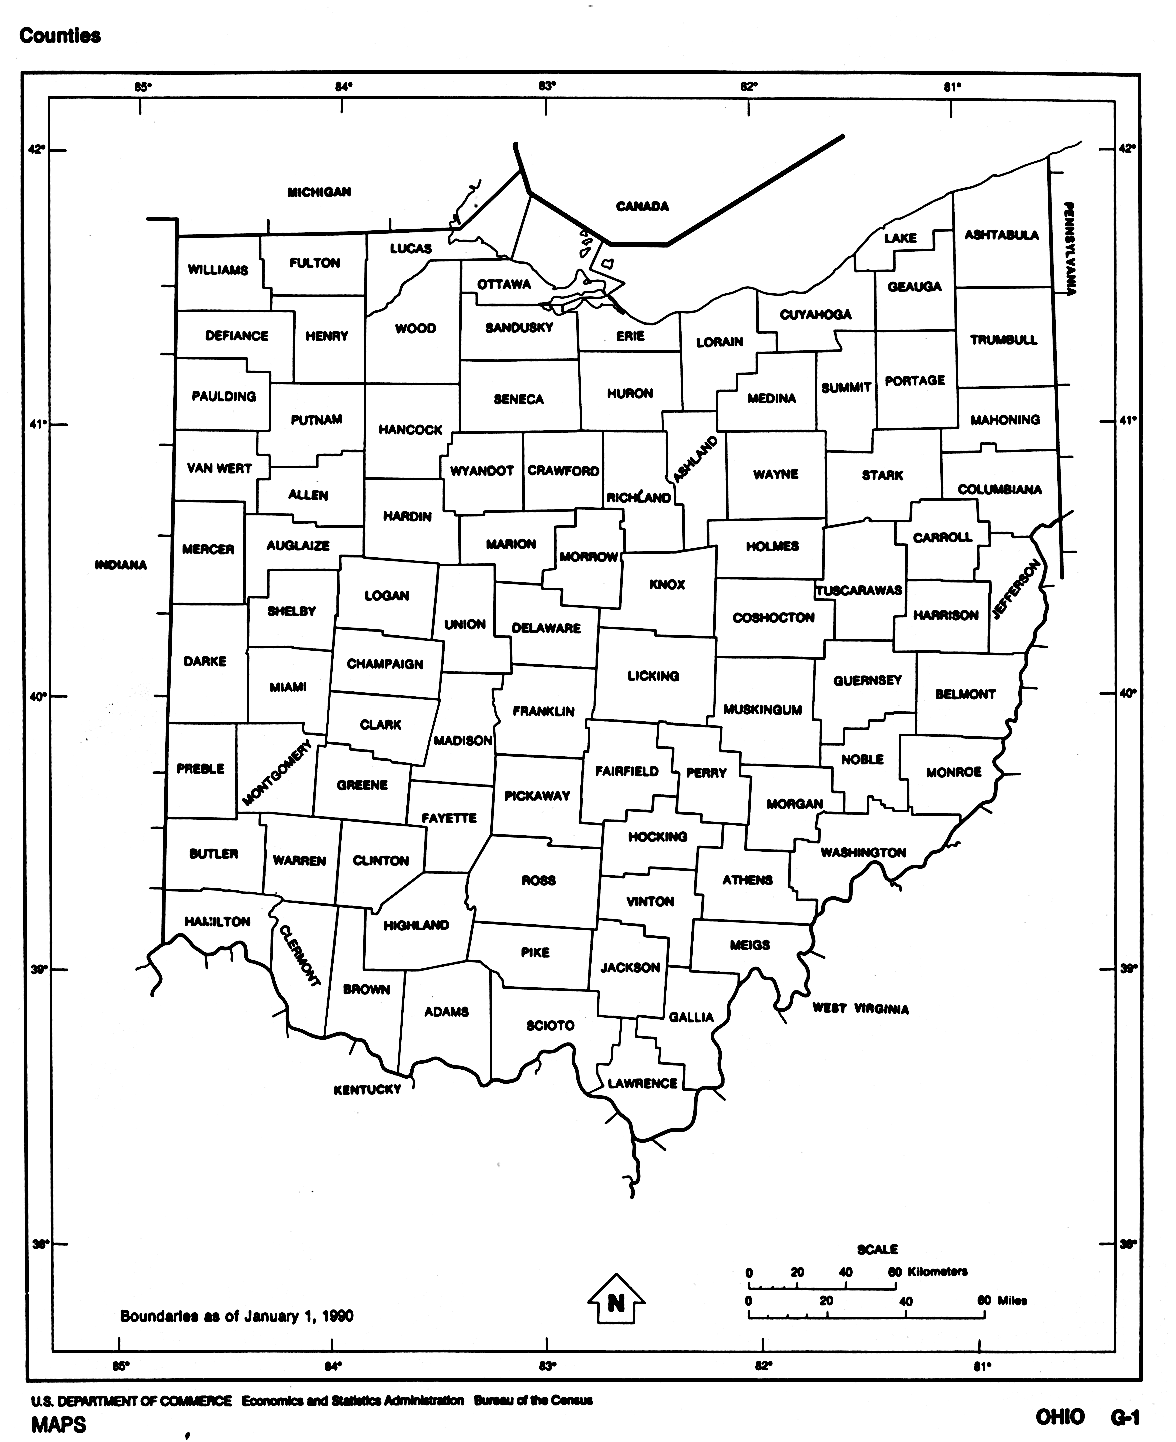 Ohio State map with counties location and outline of each county in OH